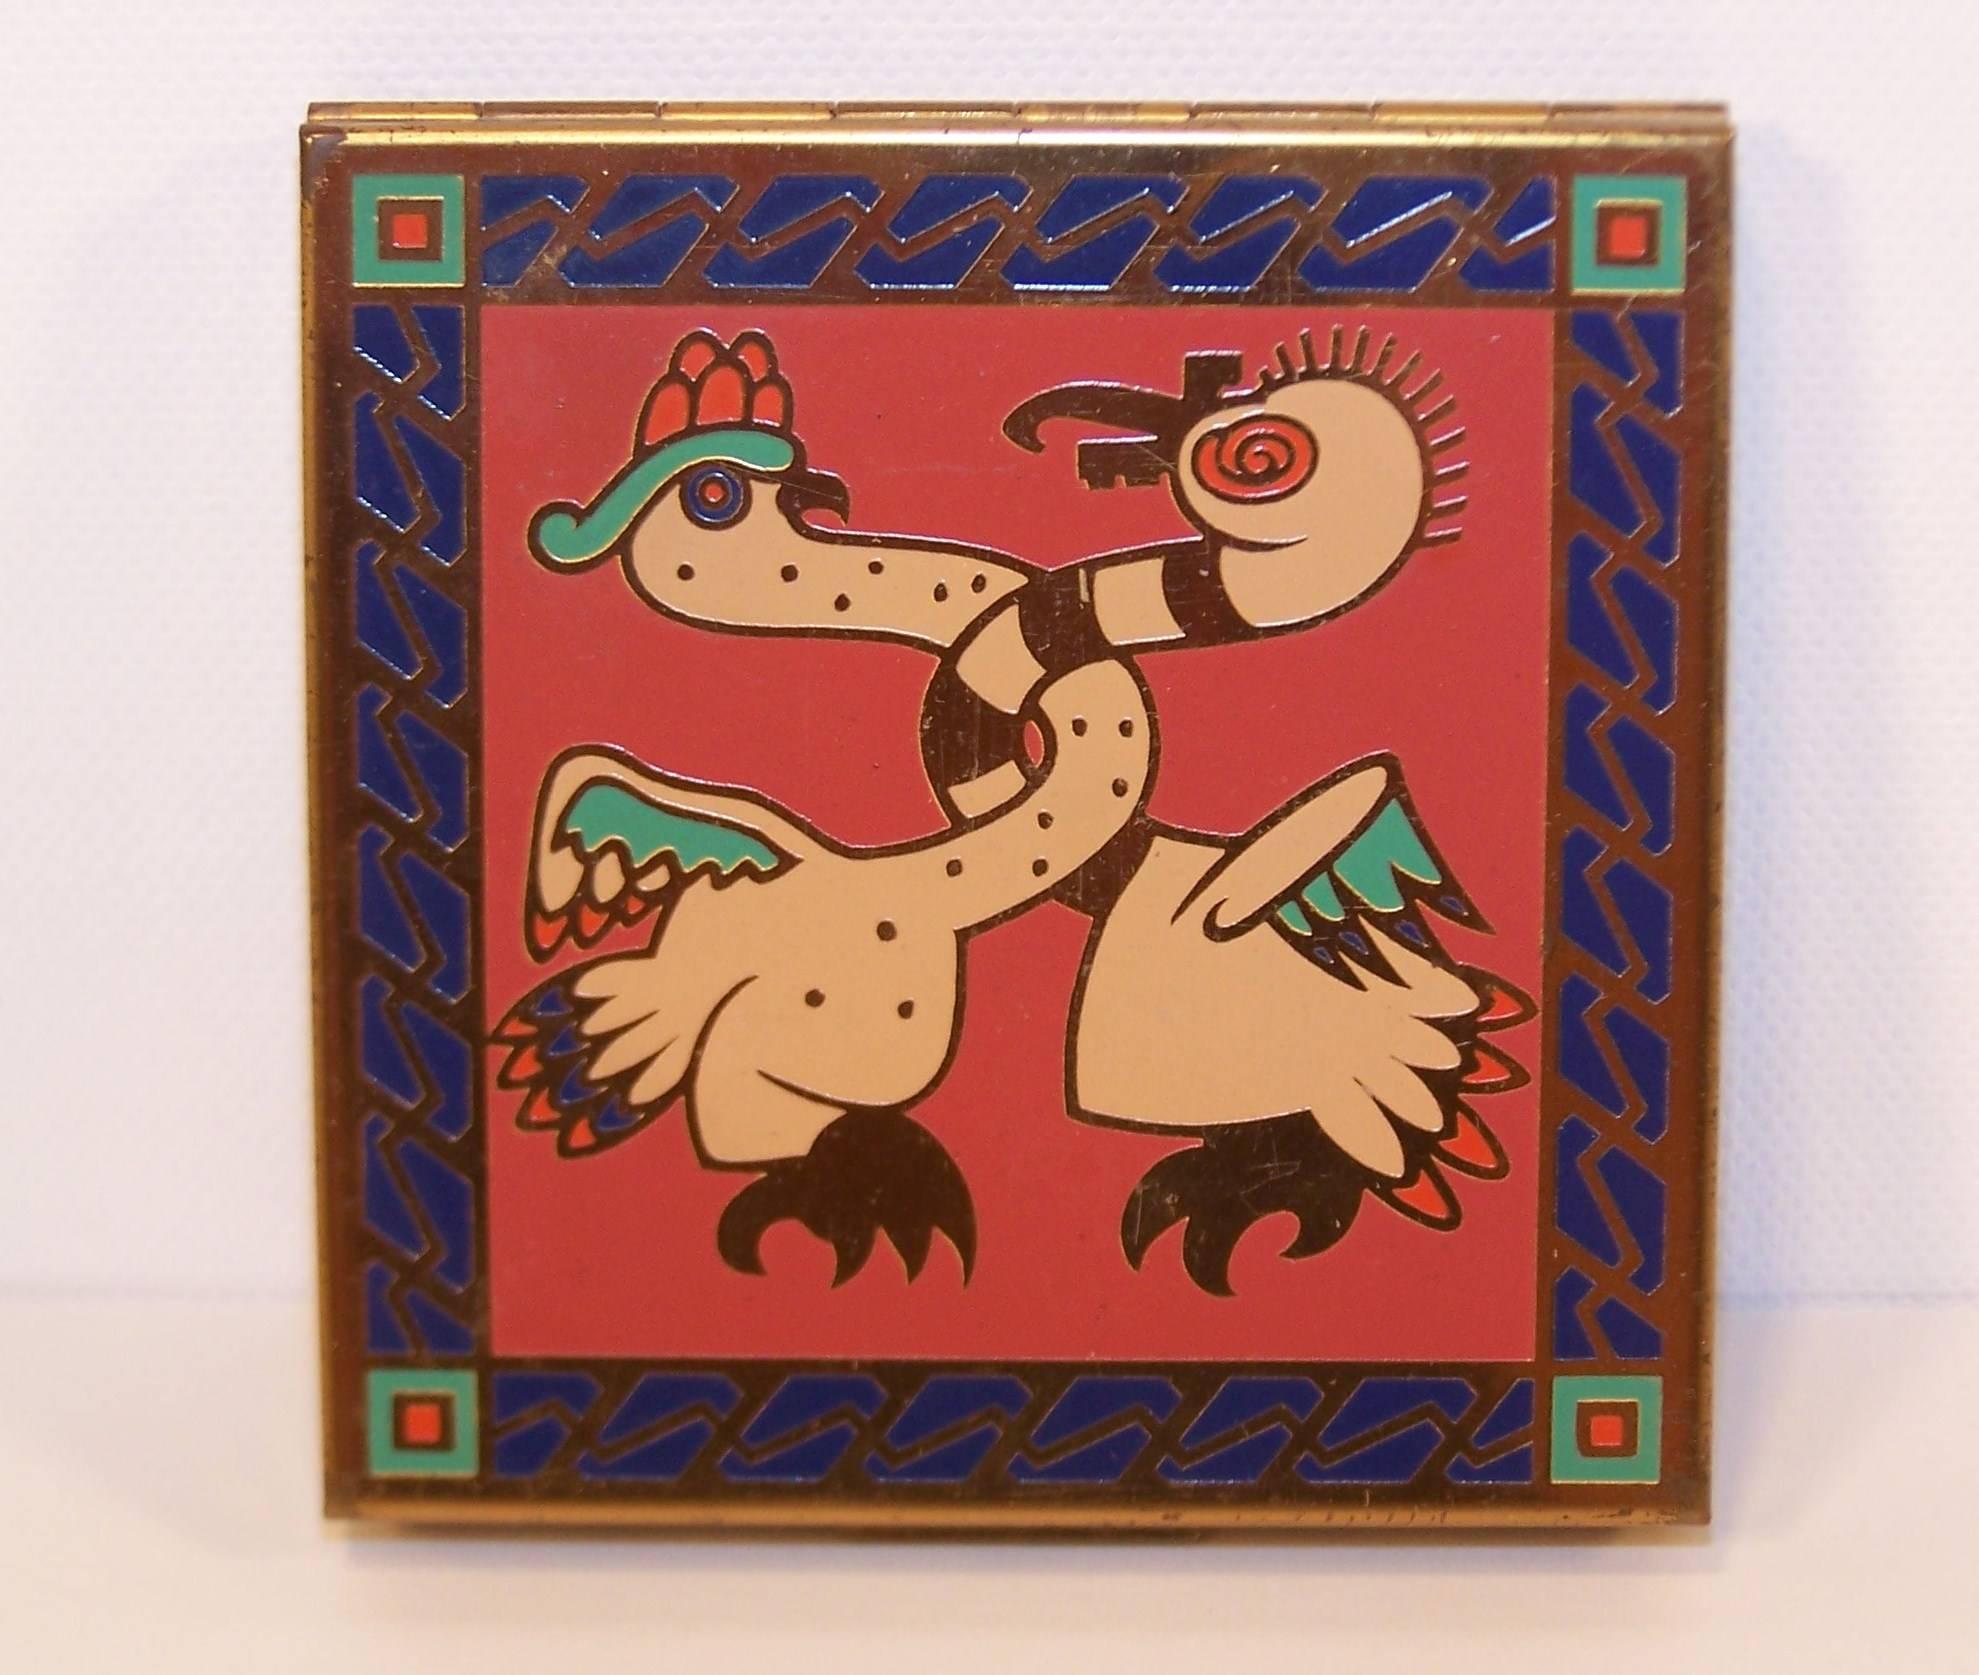 The graphic enameled decoration on this Zell mirrored compact is reminiscent of exotic pre-Columbian art or native American designs.  The chickens pictured on the front and back are outlined in gold with blue, green and red highlights.  The interior